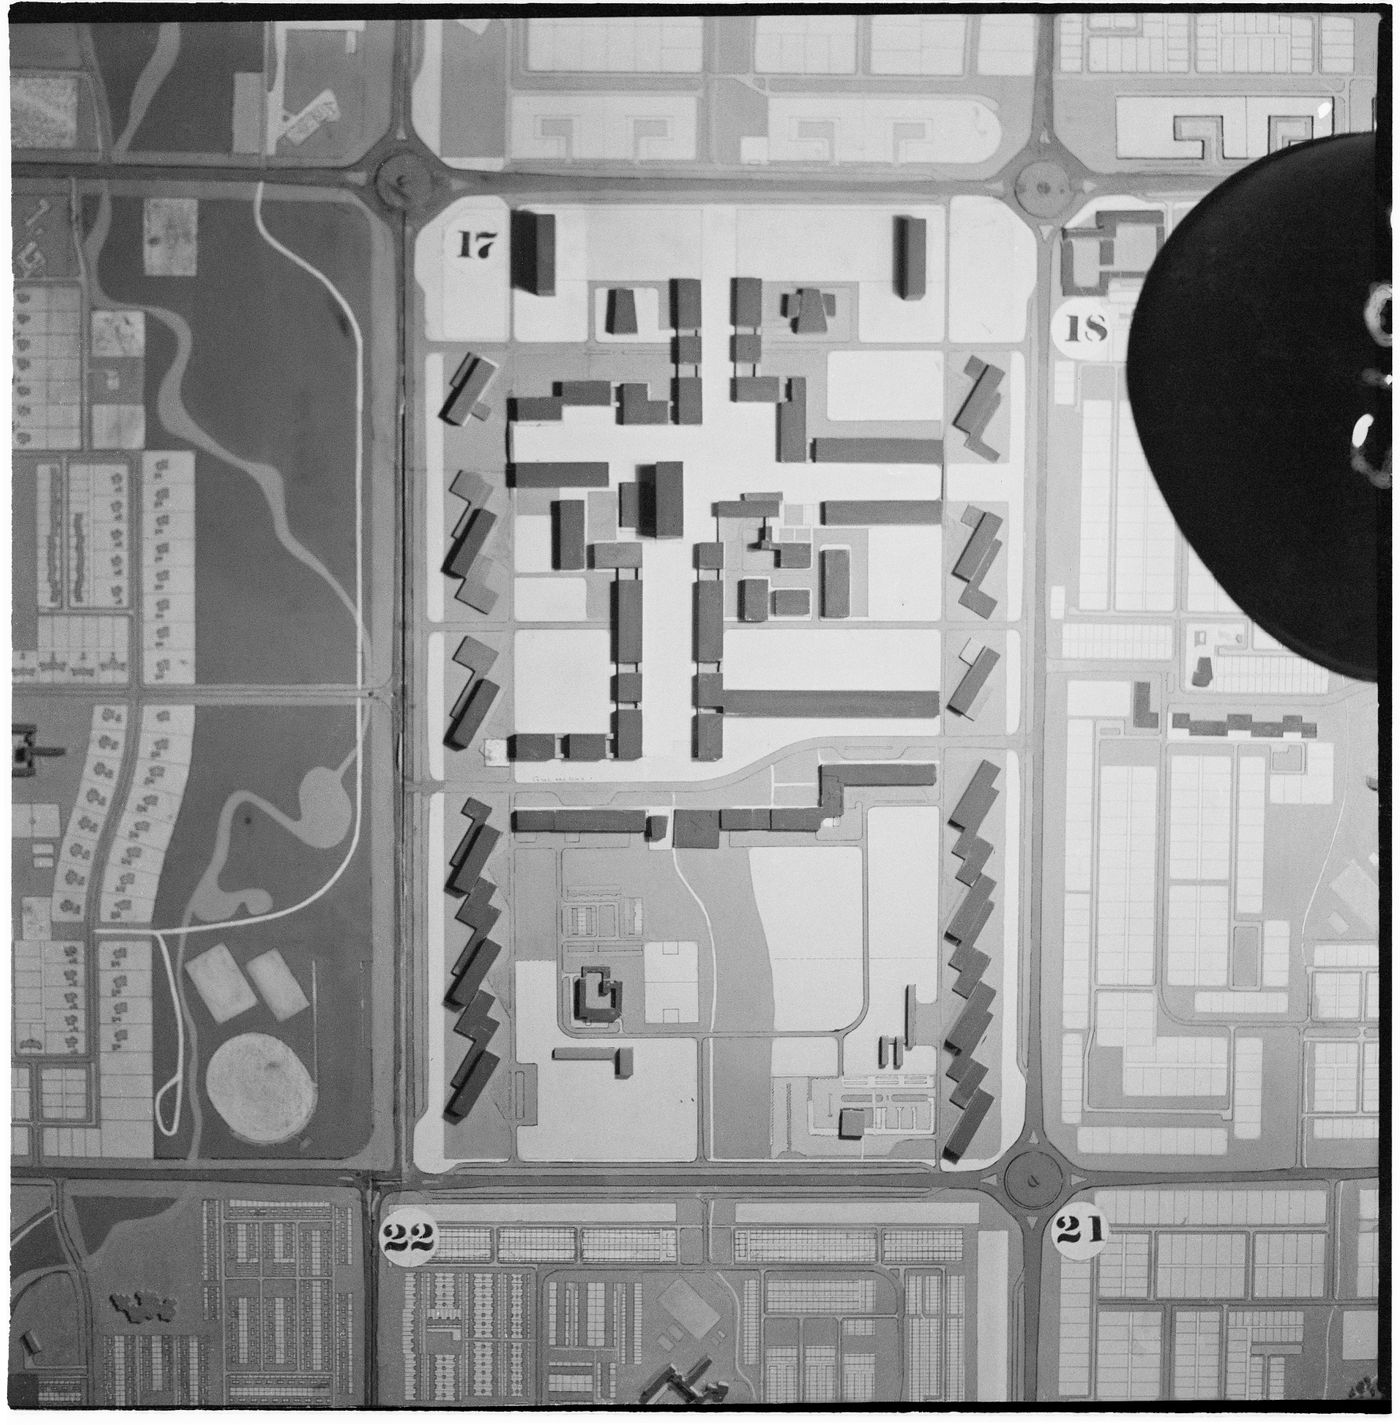 Model of the plan for Sector 17, Chandigarh, India